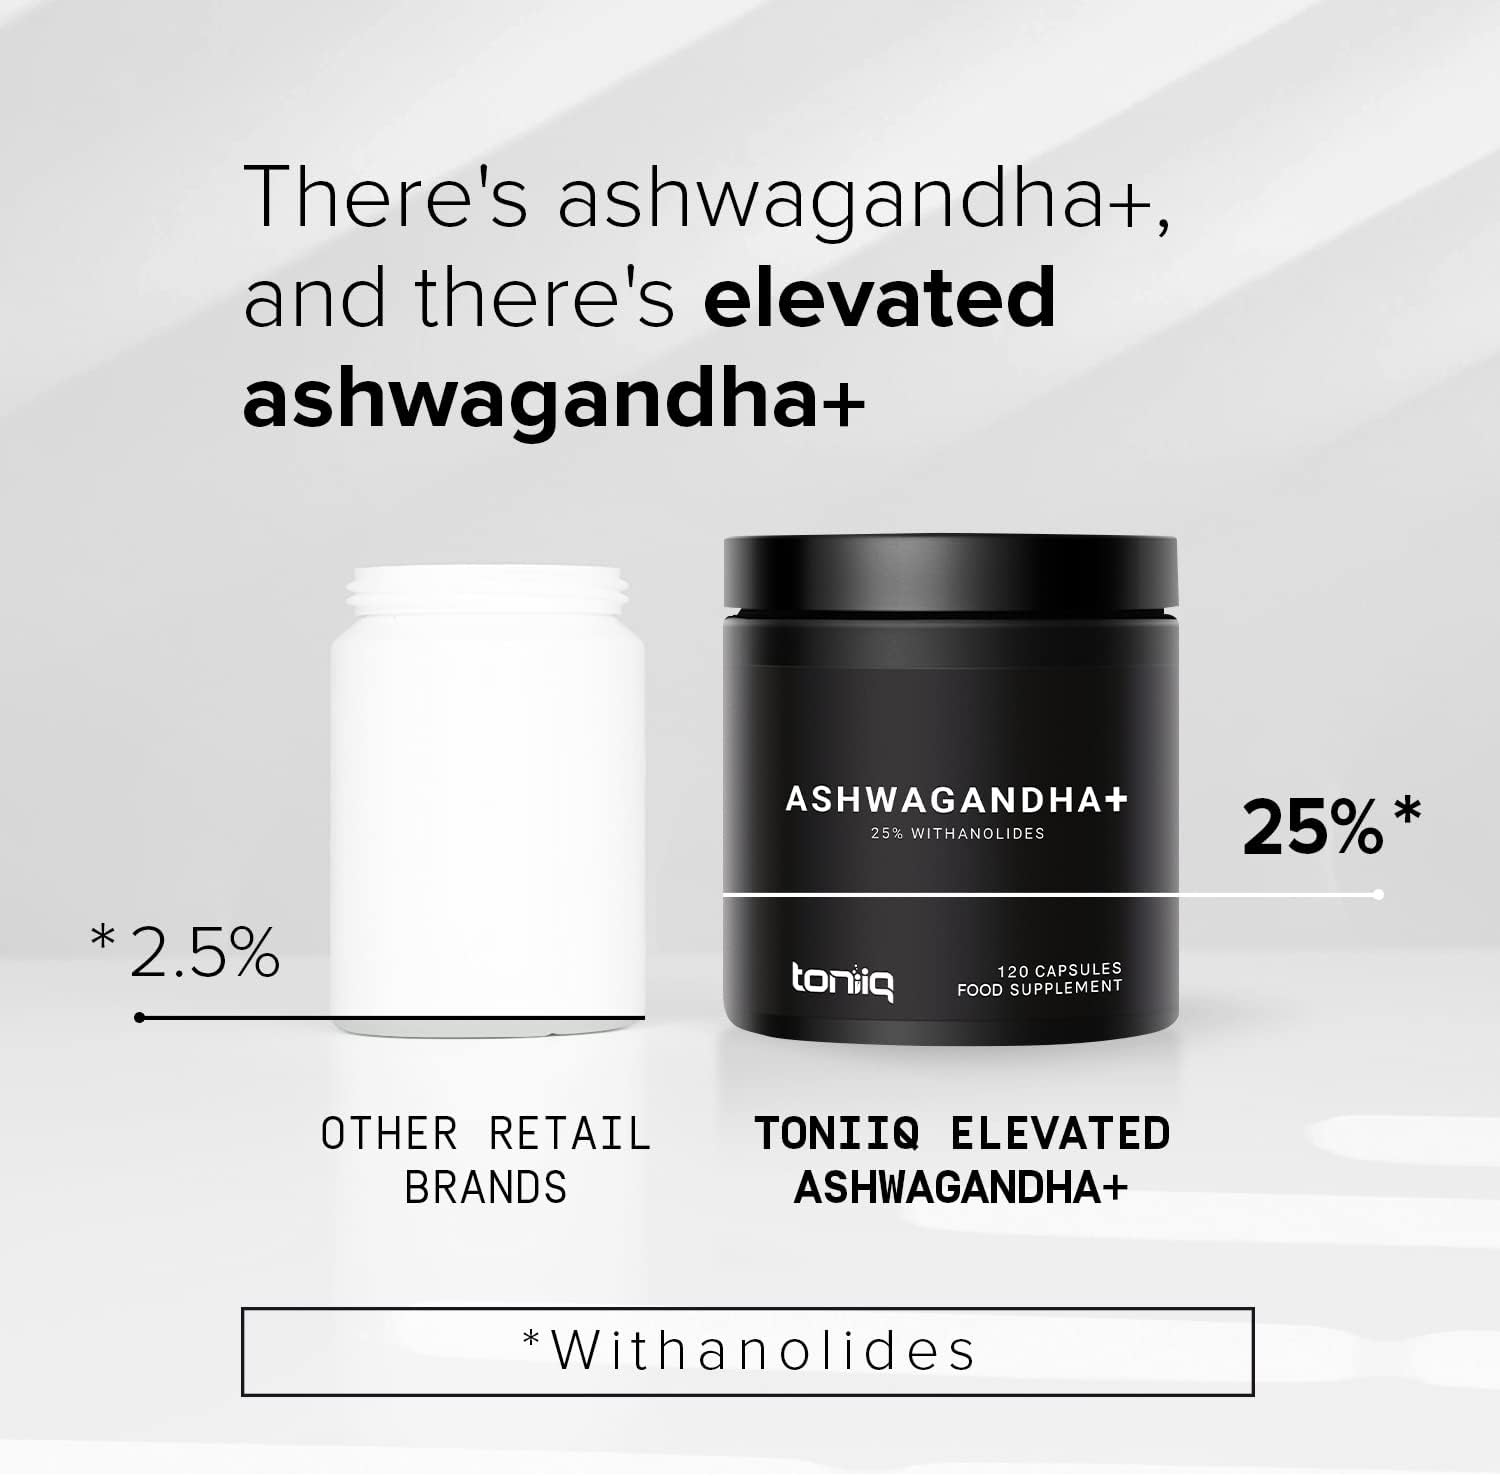 52,000mg 40x Concentrated Ashwagandha Capsules - 25% Withanolides - Ul